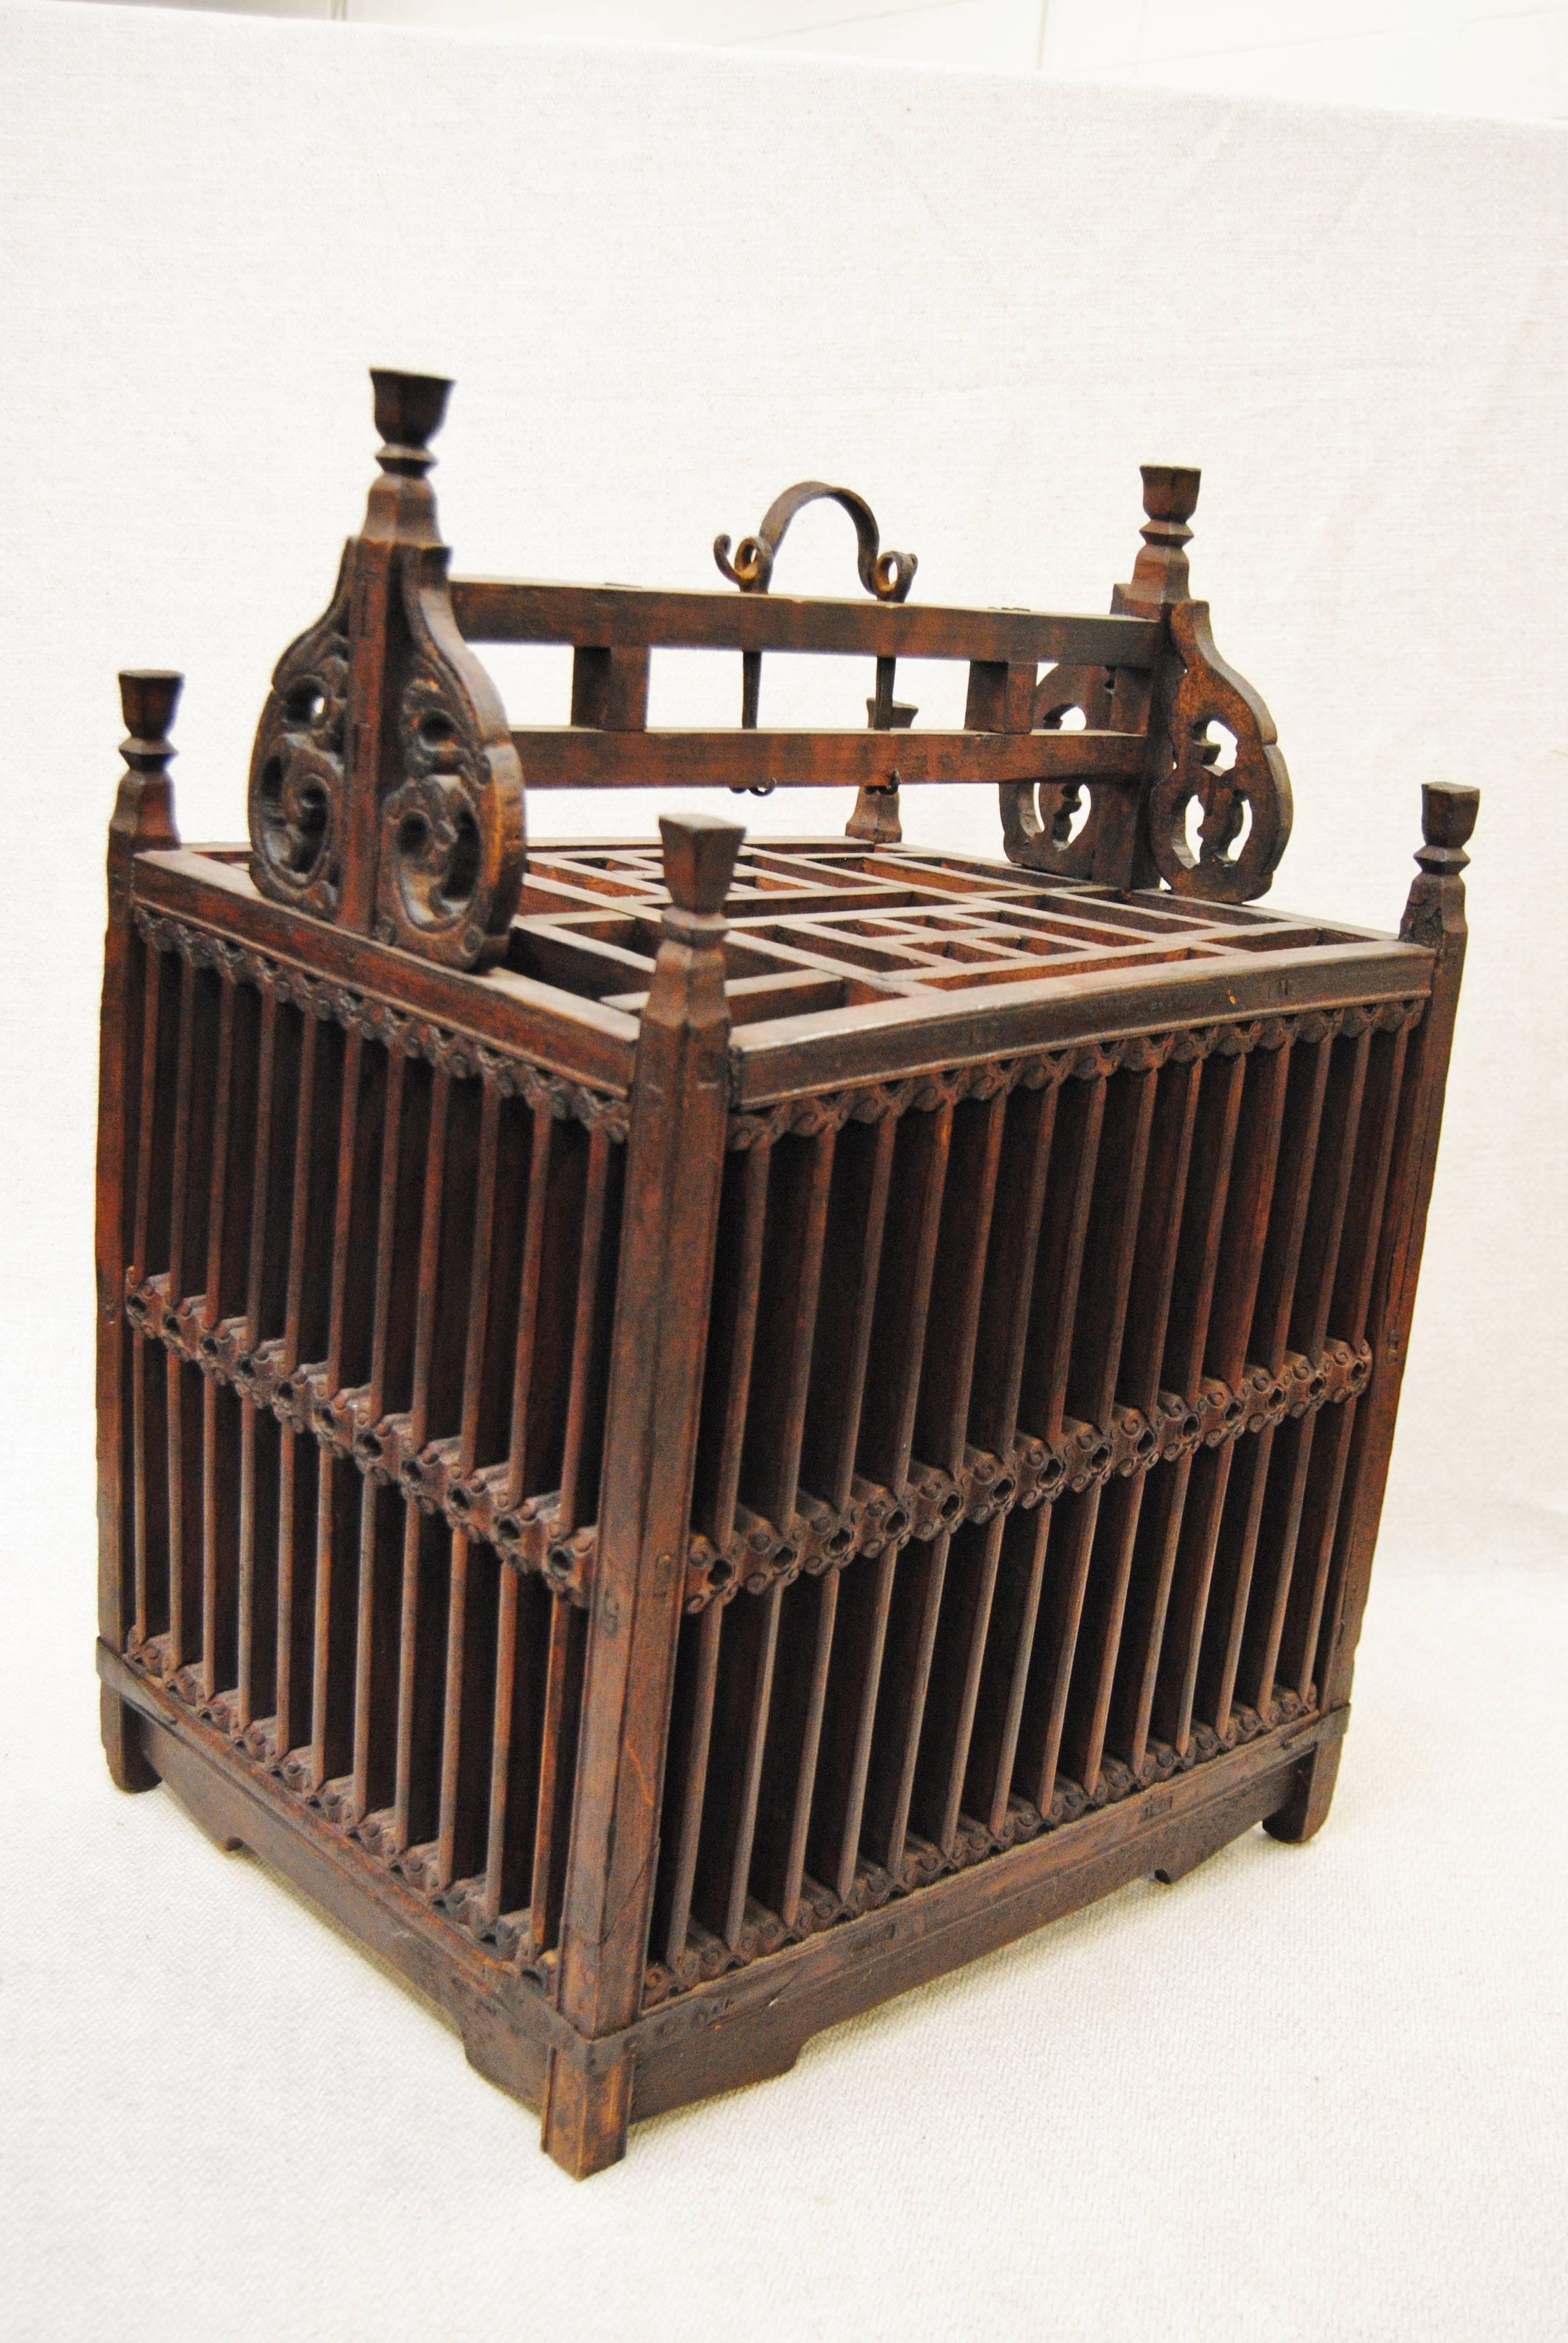 Hand-carved Chinese bird or animal cage that was made to be given as a wedding gift, circa 1850. This is a large, heavy cage with detailed carving. There is a hand-forged iron handle and a small opening at the top. A very rare Chinese piece of